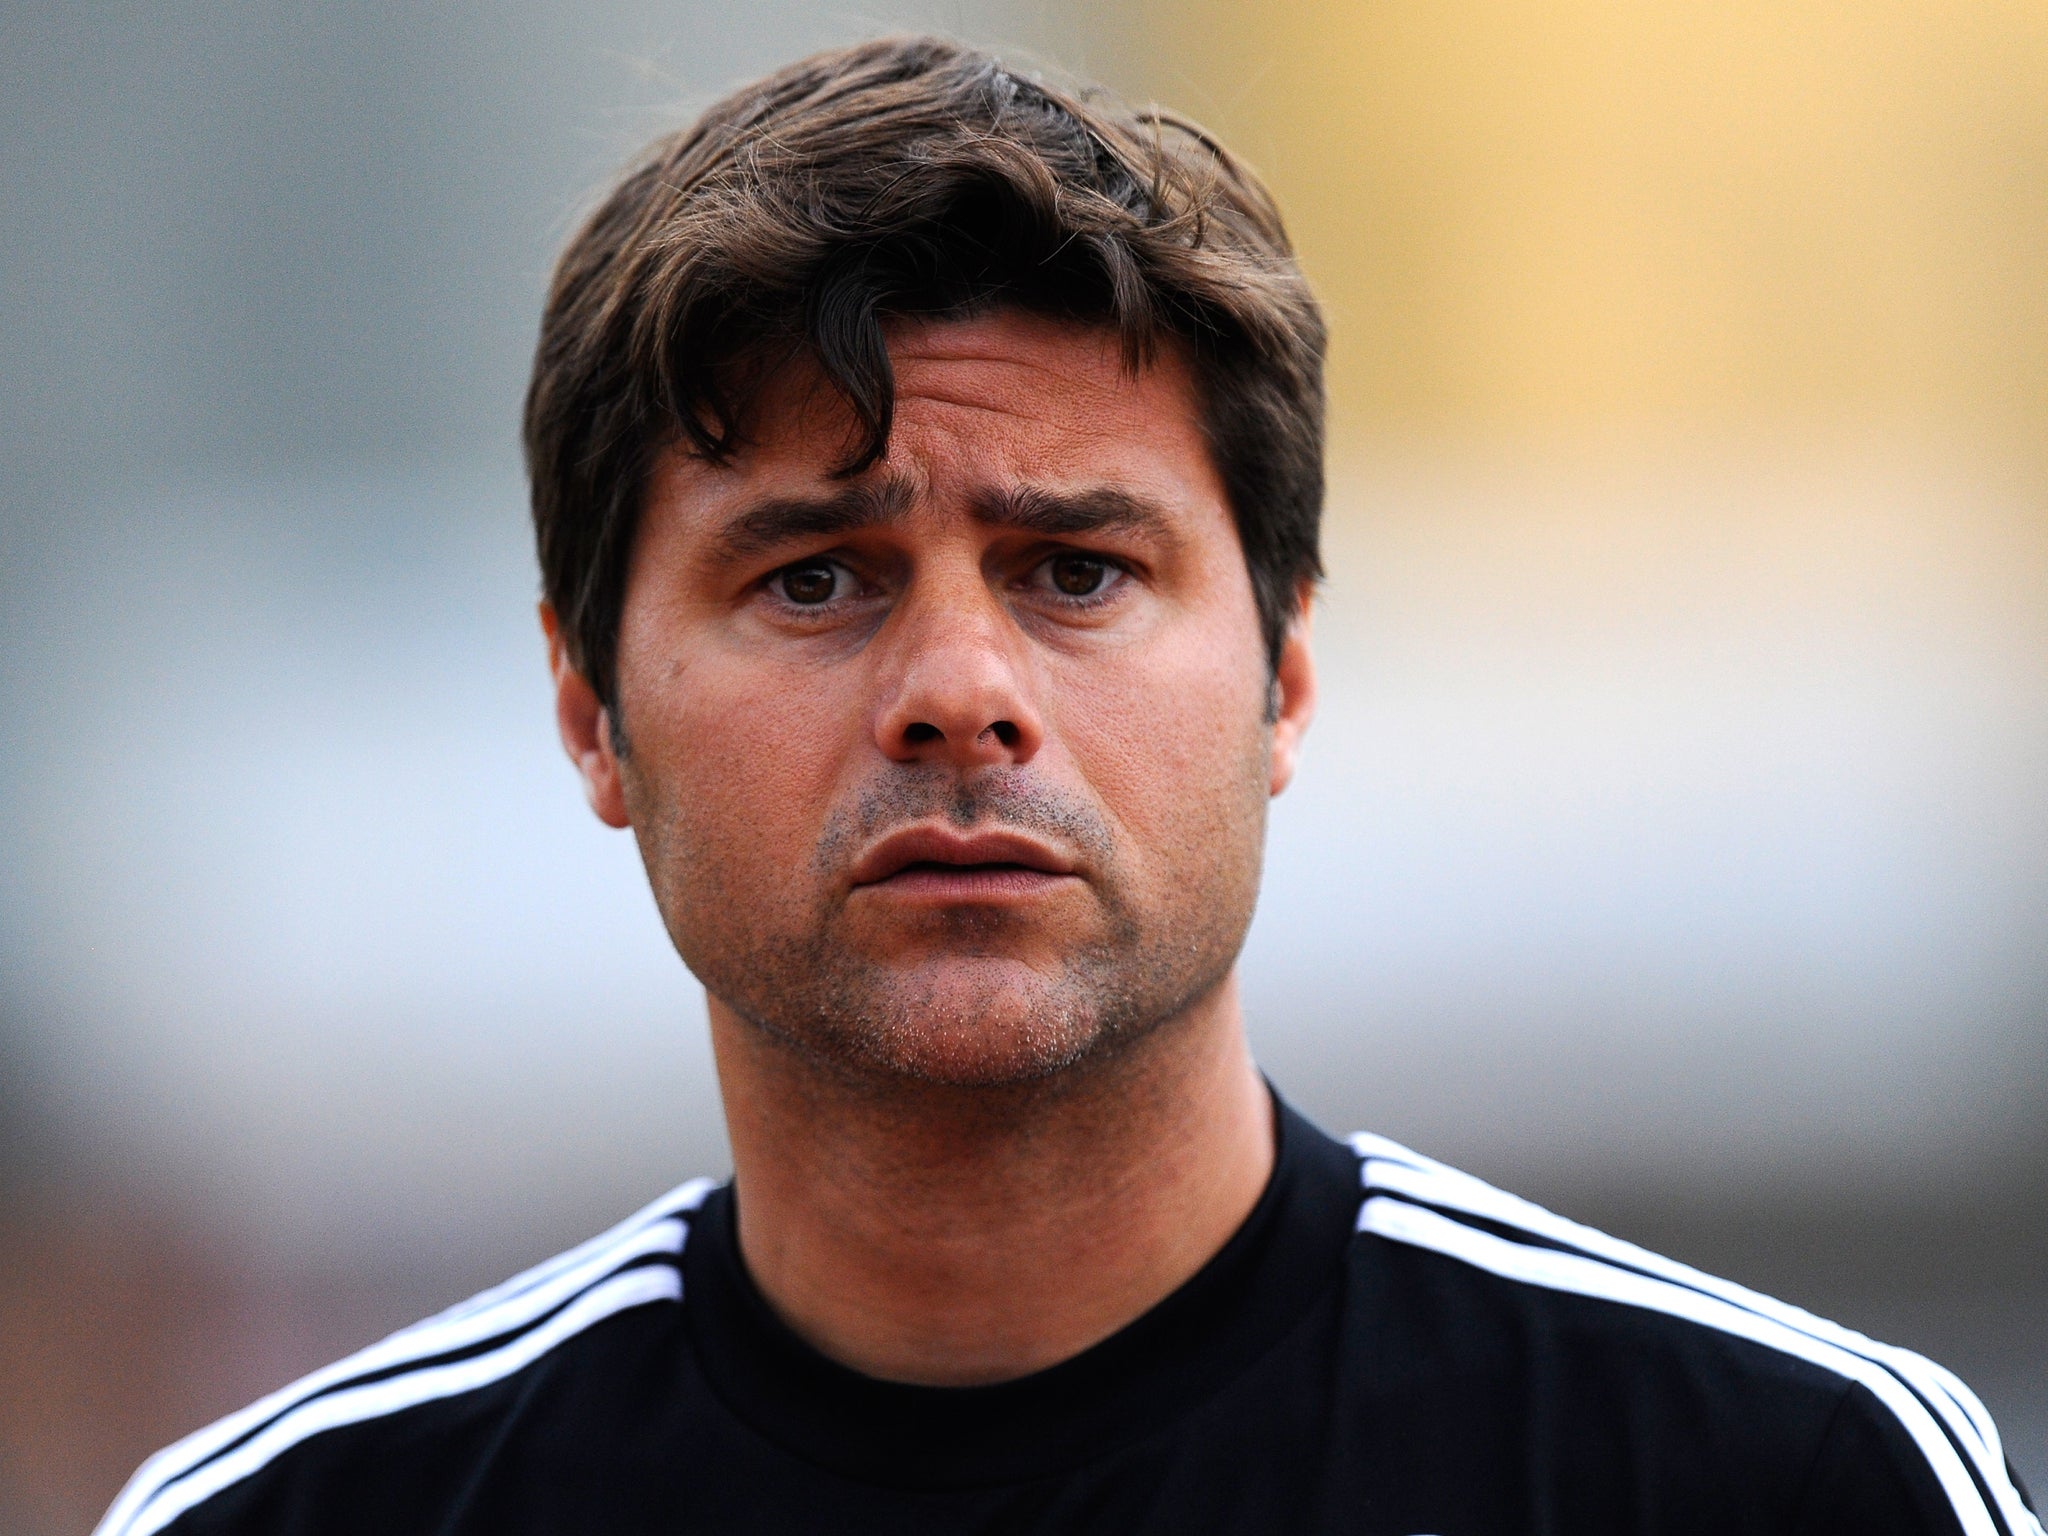 Mauricio Pochettino has hailed his side's work ethic after their good start to the season